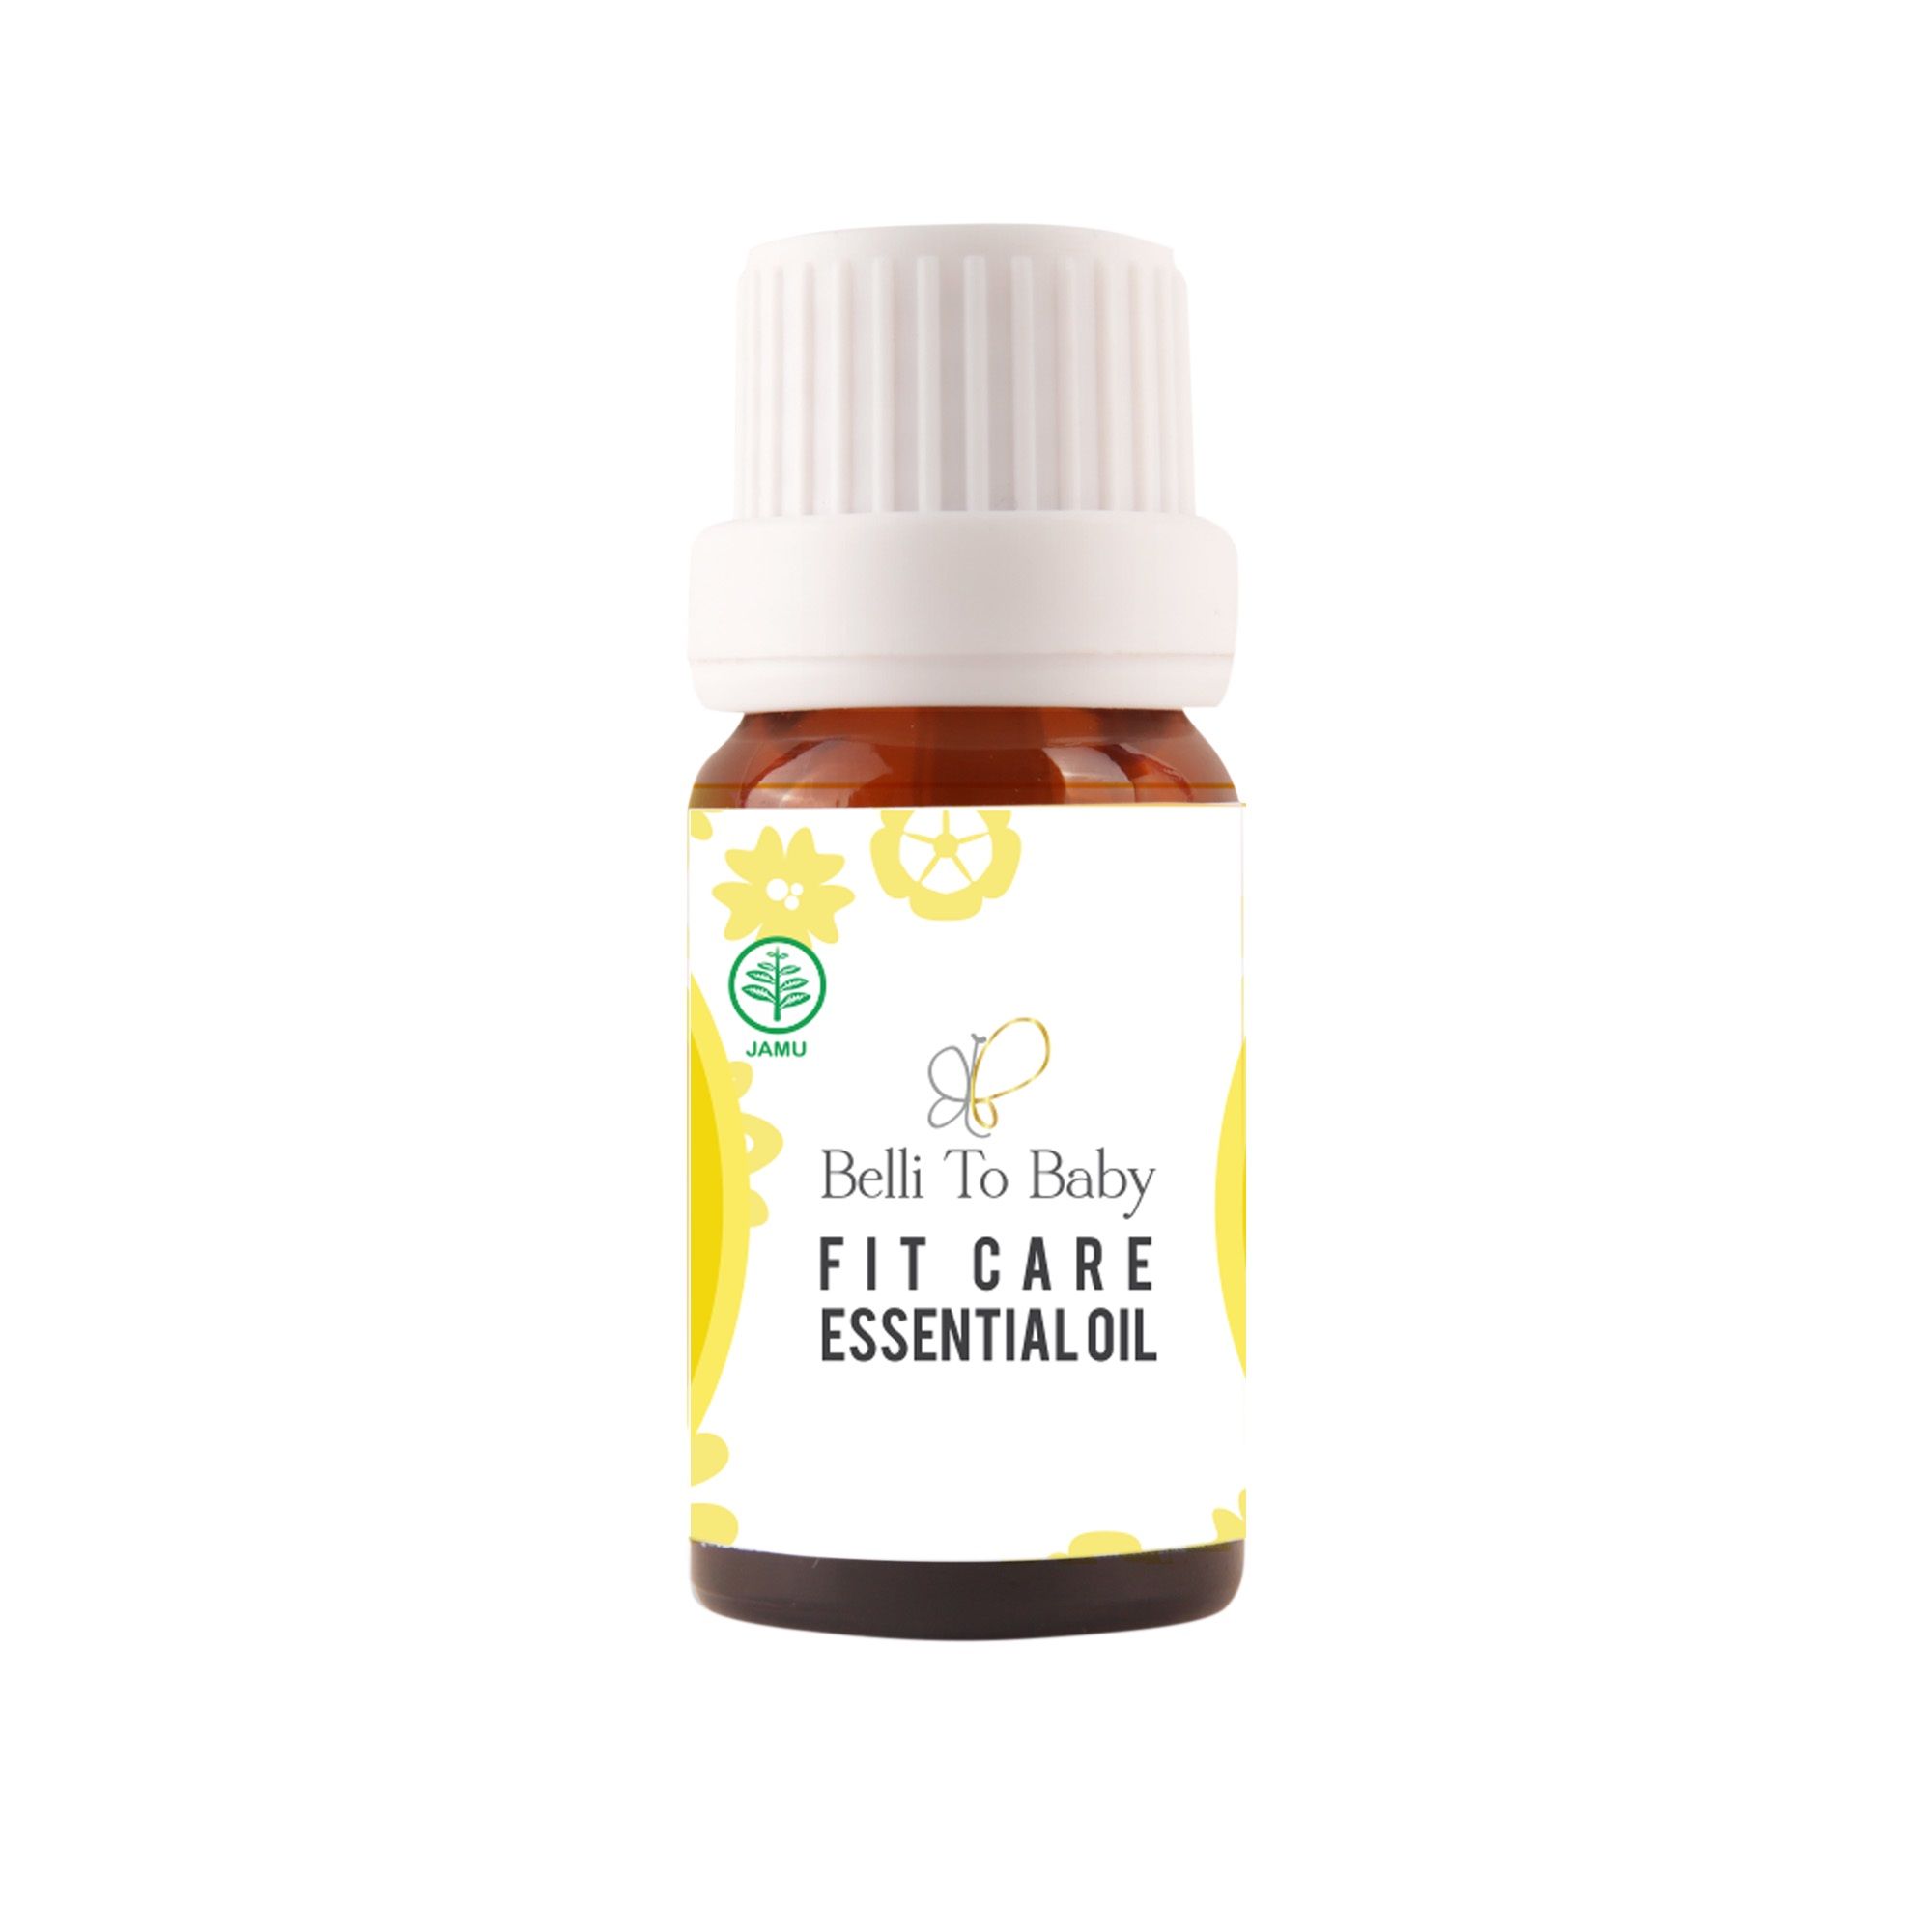 Belli To Baby Essential Oil Fit Care 10ml - 4